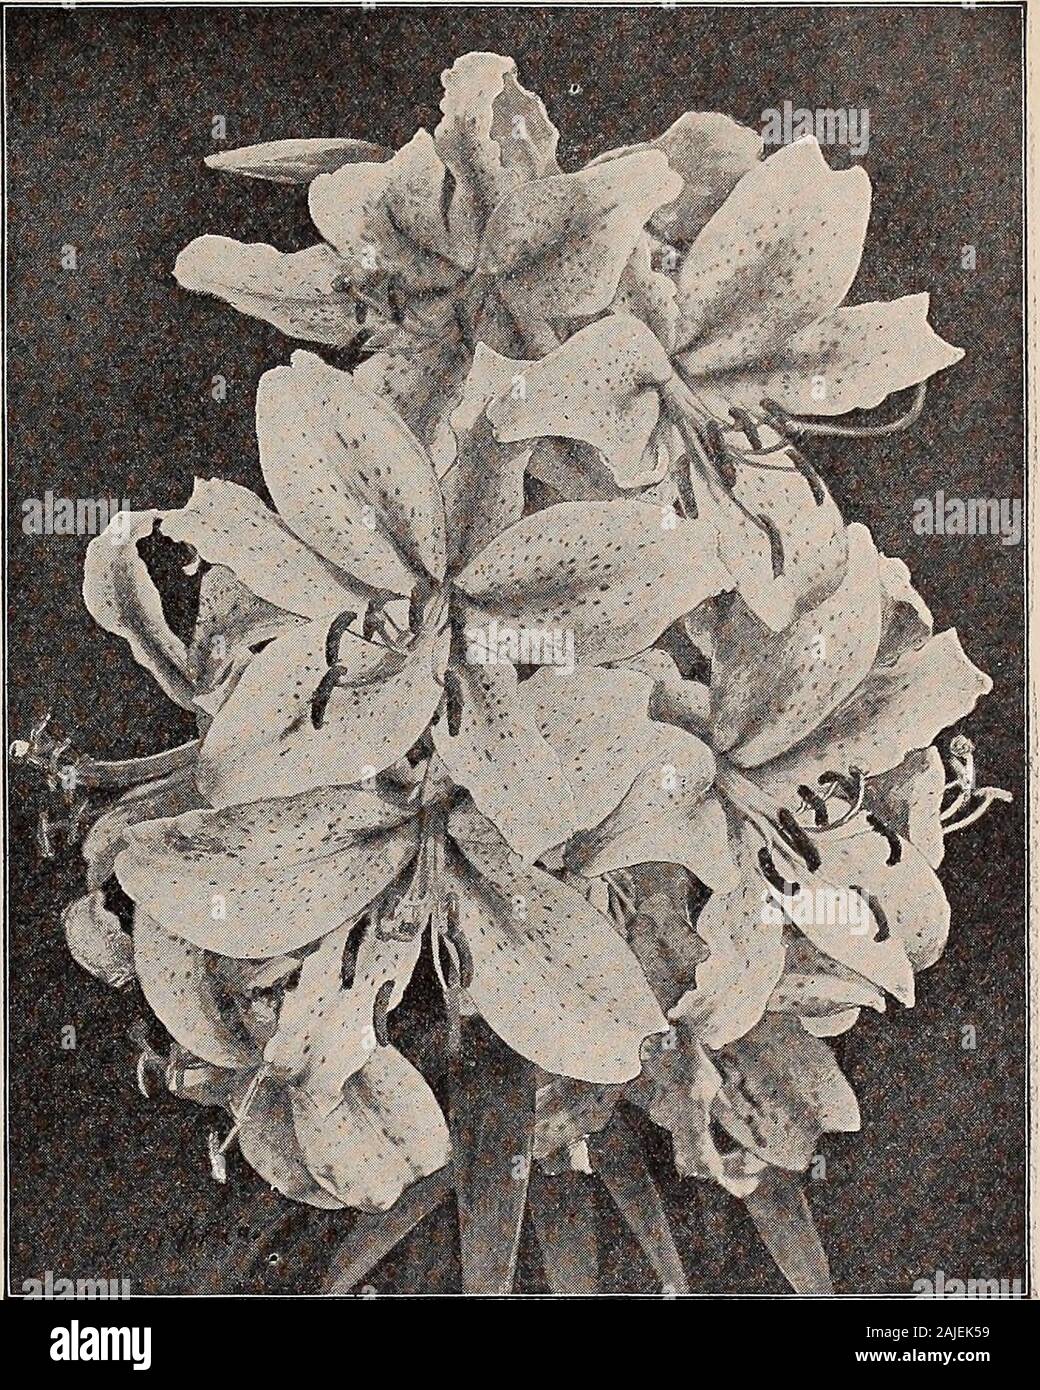 Beckert's garden, field and flower seeds . ; $3.75 per doz.Croceum. Golden yellow. 10c. ea., by mail 12c.; $1 per doz.Elegans, Semi-double. Fringed petals, tipped white. 10 cts. each, by mail 12 cts.; $1 per doz.Longiflorum. Pure white, trumpet-shaped. 15 cts. each, by mail 20 cts.; $1.50 per doz.Krameri. Blush-pink. 15c. ea., by mail 20c.; $1.50 per doz.Martagon. Crimson, dark spots. 10 cts. each, by mail 12 cts.; $1 per doz.Pardallnum. Scarlet, purple spots. 10 cts. each, by mail 12 cts.; $1 per doz.Superbum. Orange, tipped red. 10c. each, by mail 12c.; $1 per doz. Tigrinum fl. pi. Double or Stock Photo